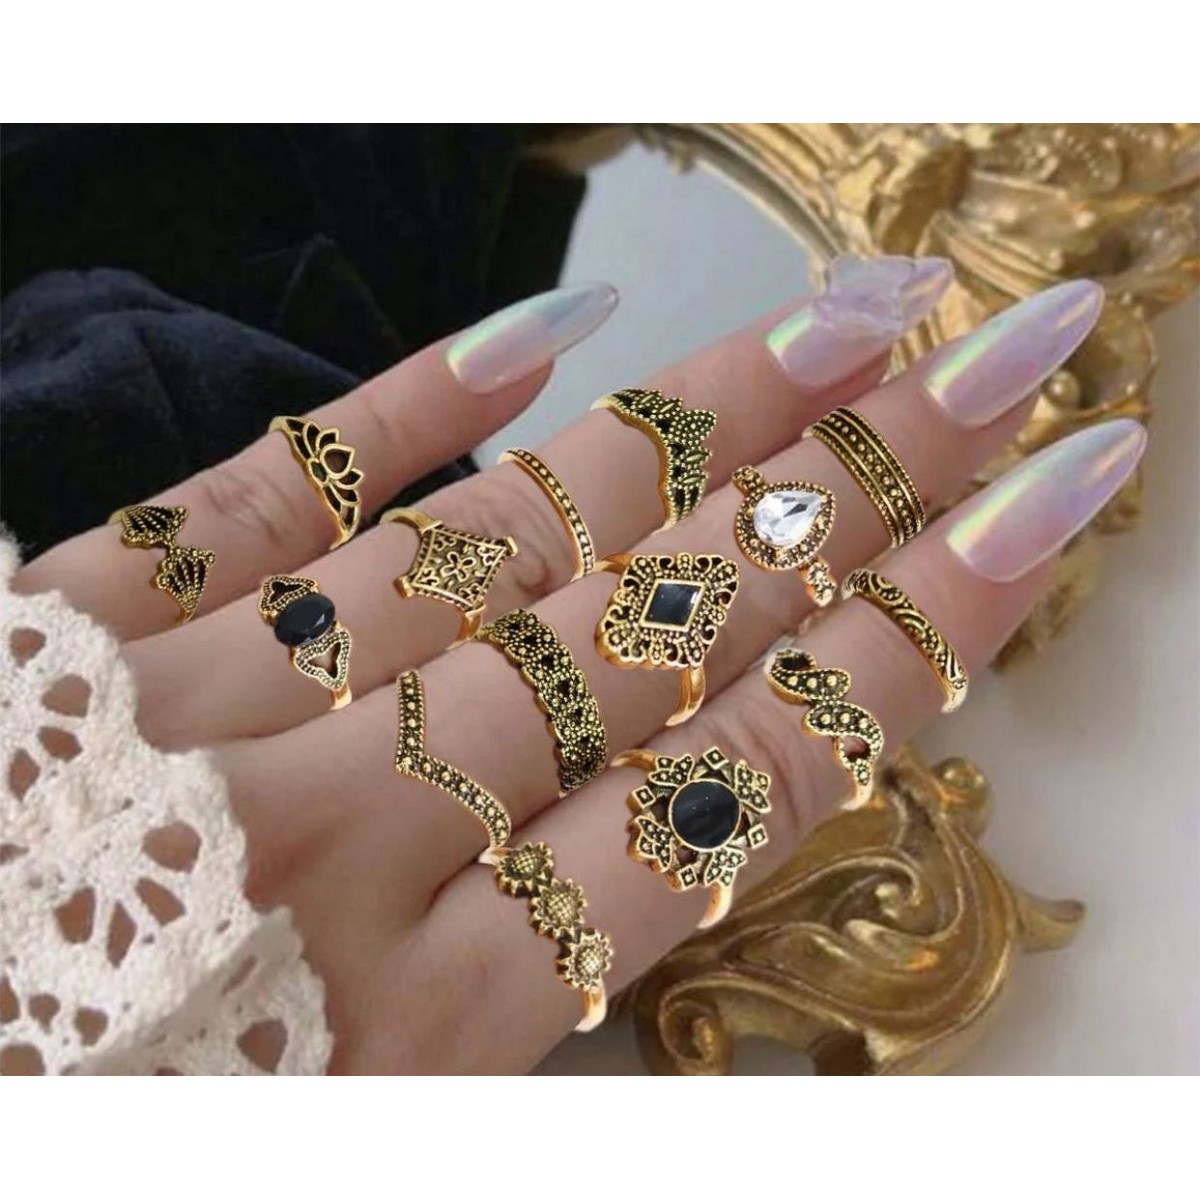 Eisa 15 Pieces Rings For Girls - High Quality Imported Latest Design 15 Pcs Ring Set For Girls - Ring Set For Women